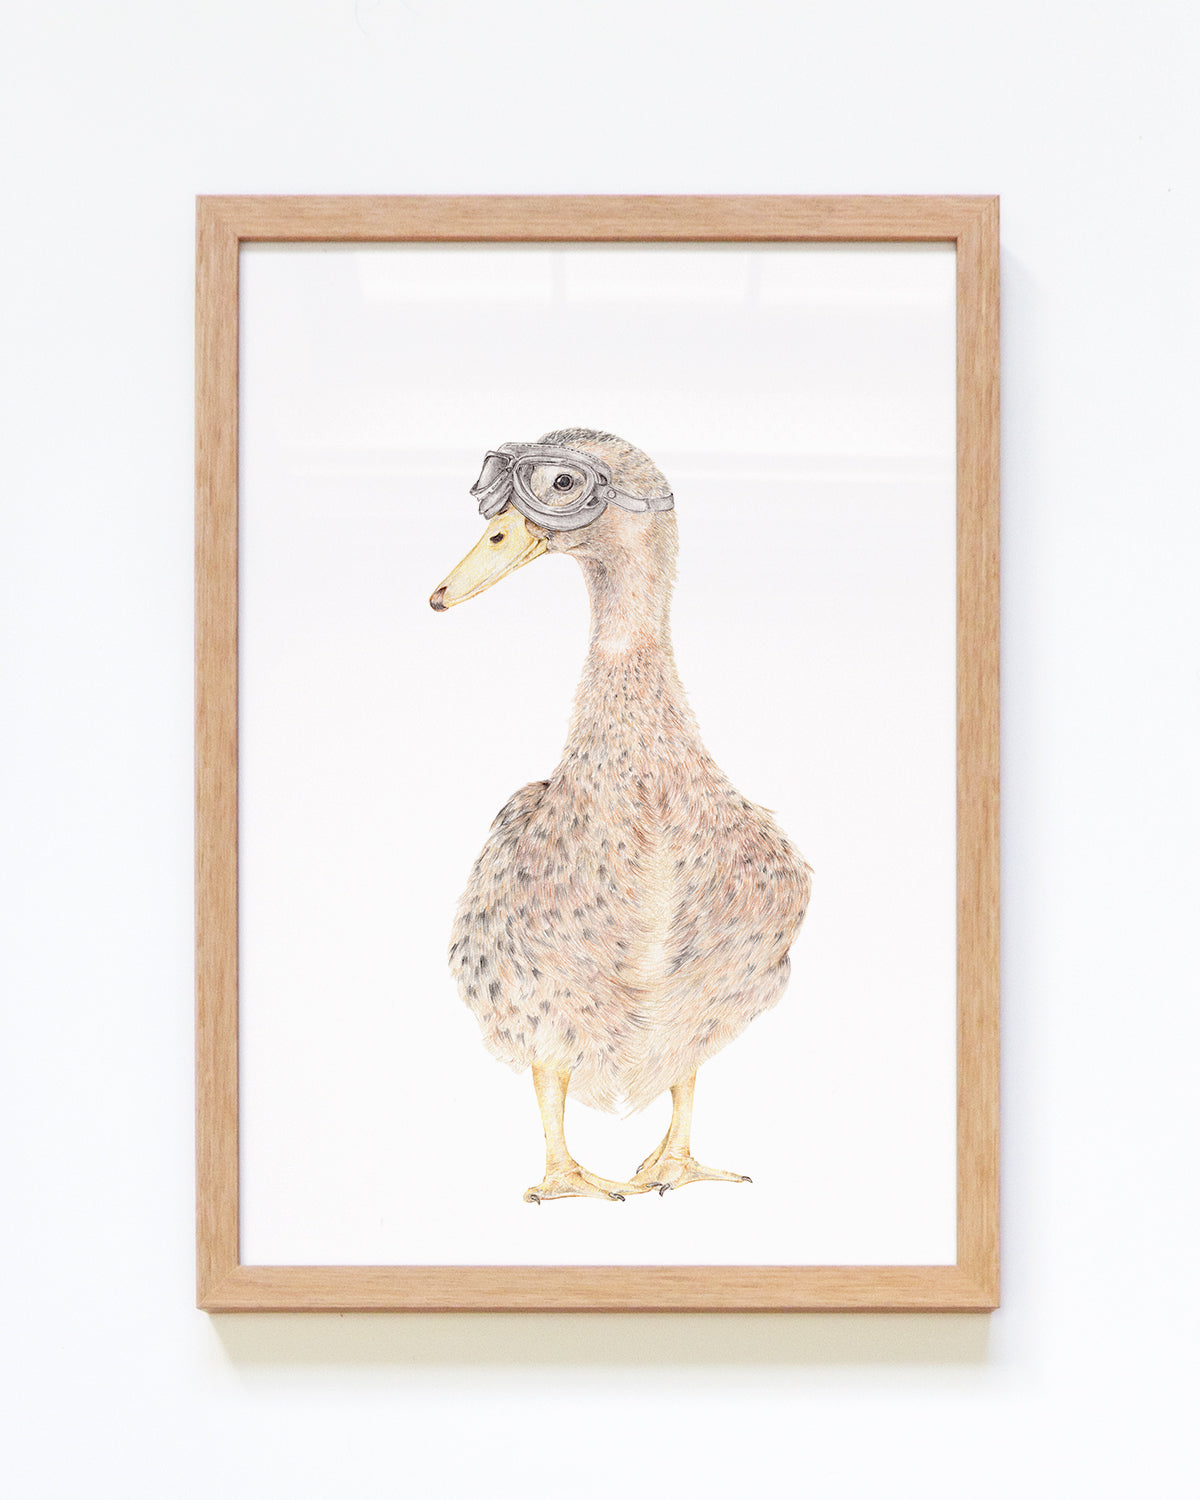 Farmhouse inspired art print featuring a duck with goggles